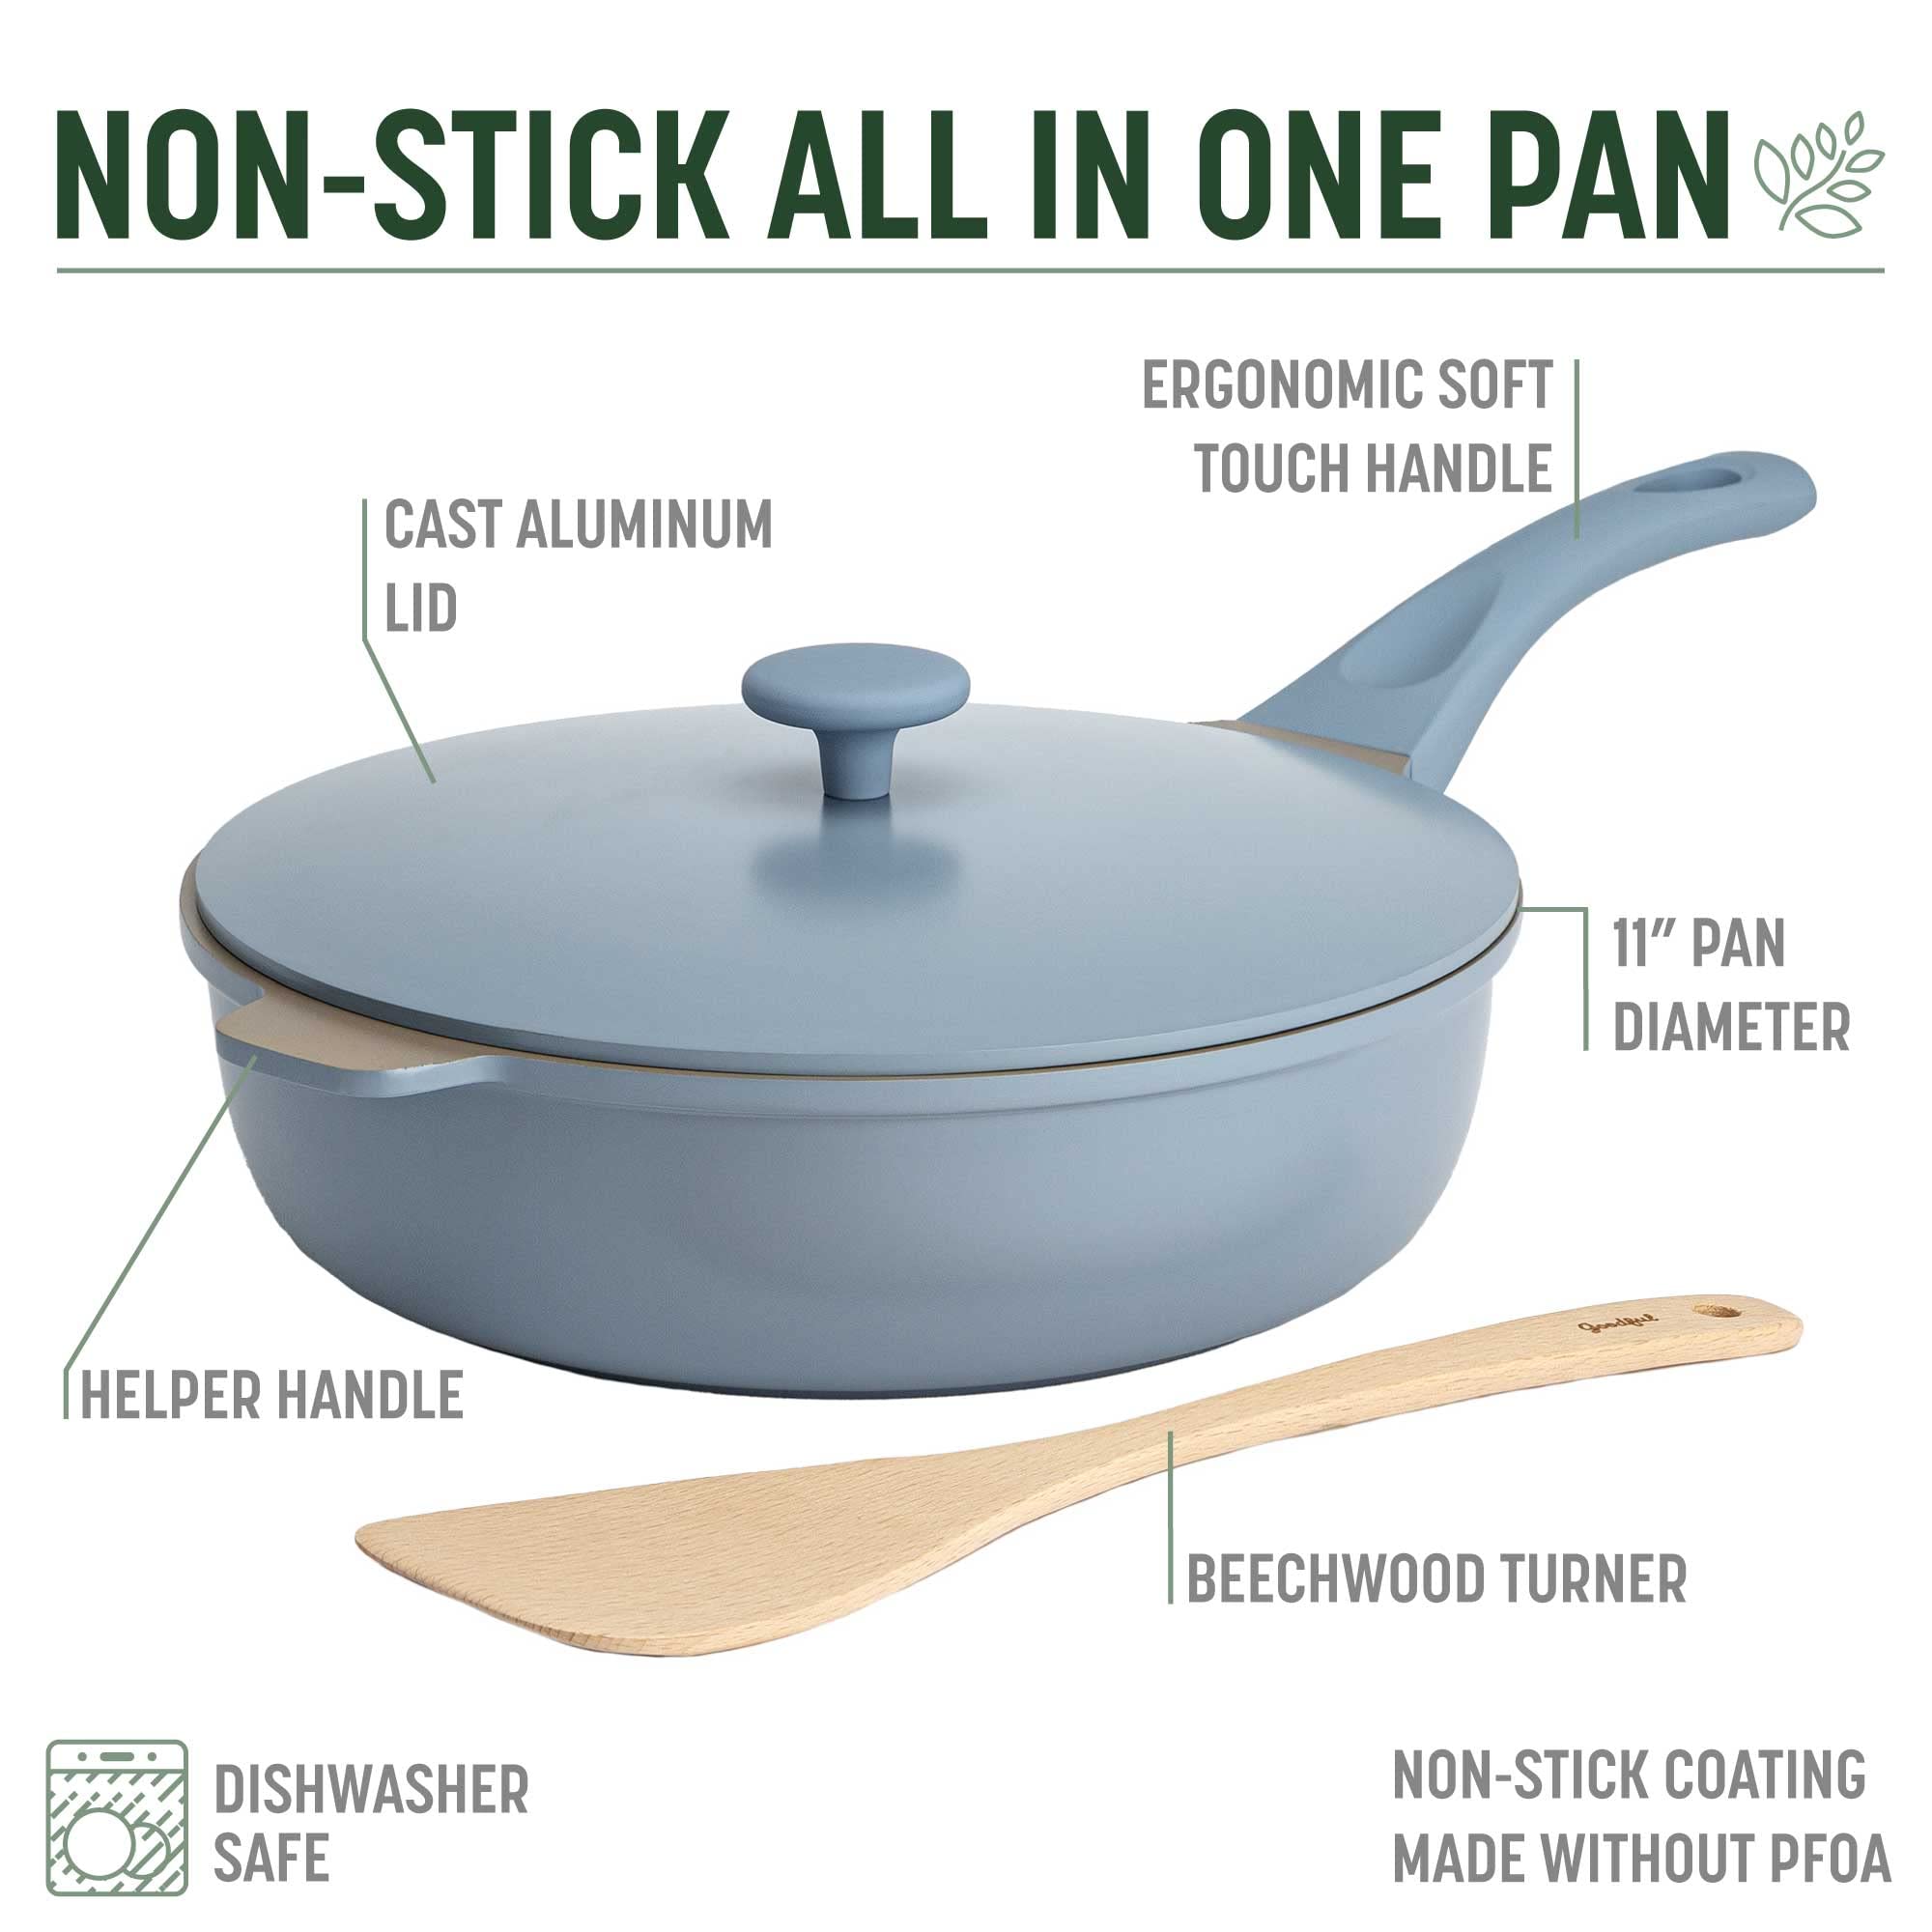 Goodful All-in-One Pan, Multilayer Nonstick, High-Performance Cast Construction, Multipurpose Design Replaces Multiple Pots and Pans, Dishwasher Safe Cookware, 11-Inch, 4.4-Quart Capacity, Blue Mist